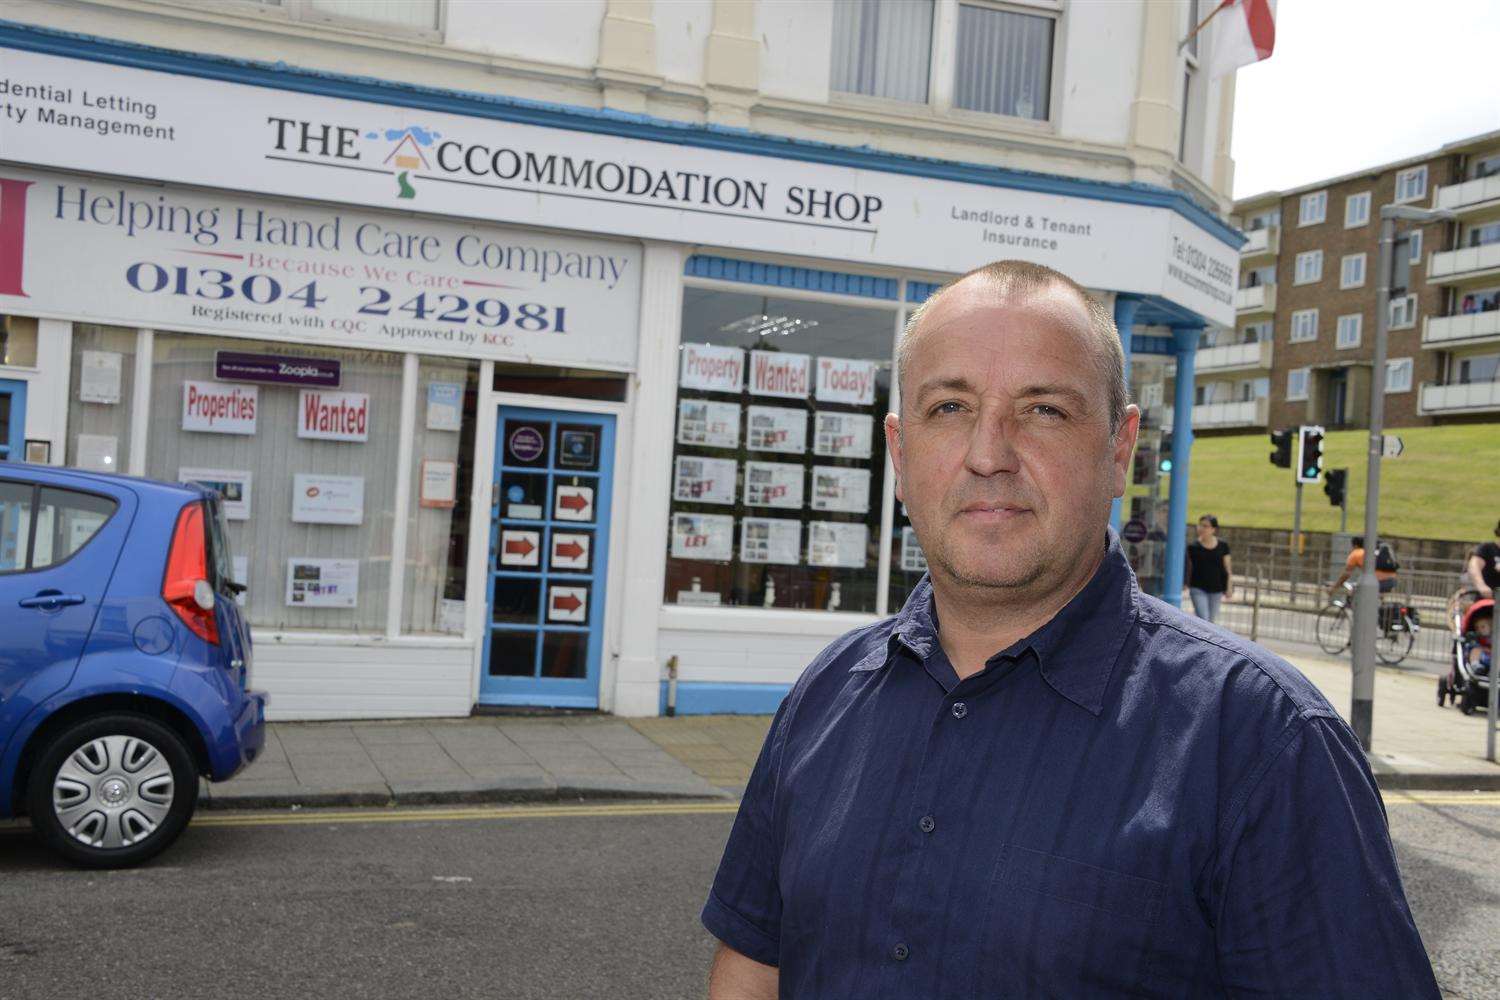 Dover, John Rose of The Accommodation Shop has won his case against a traffic warden